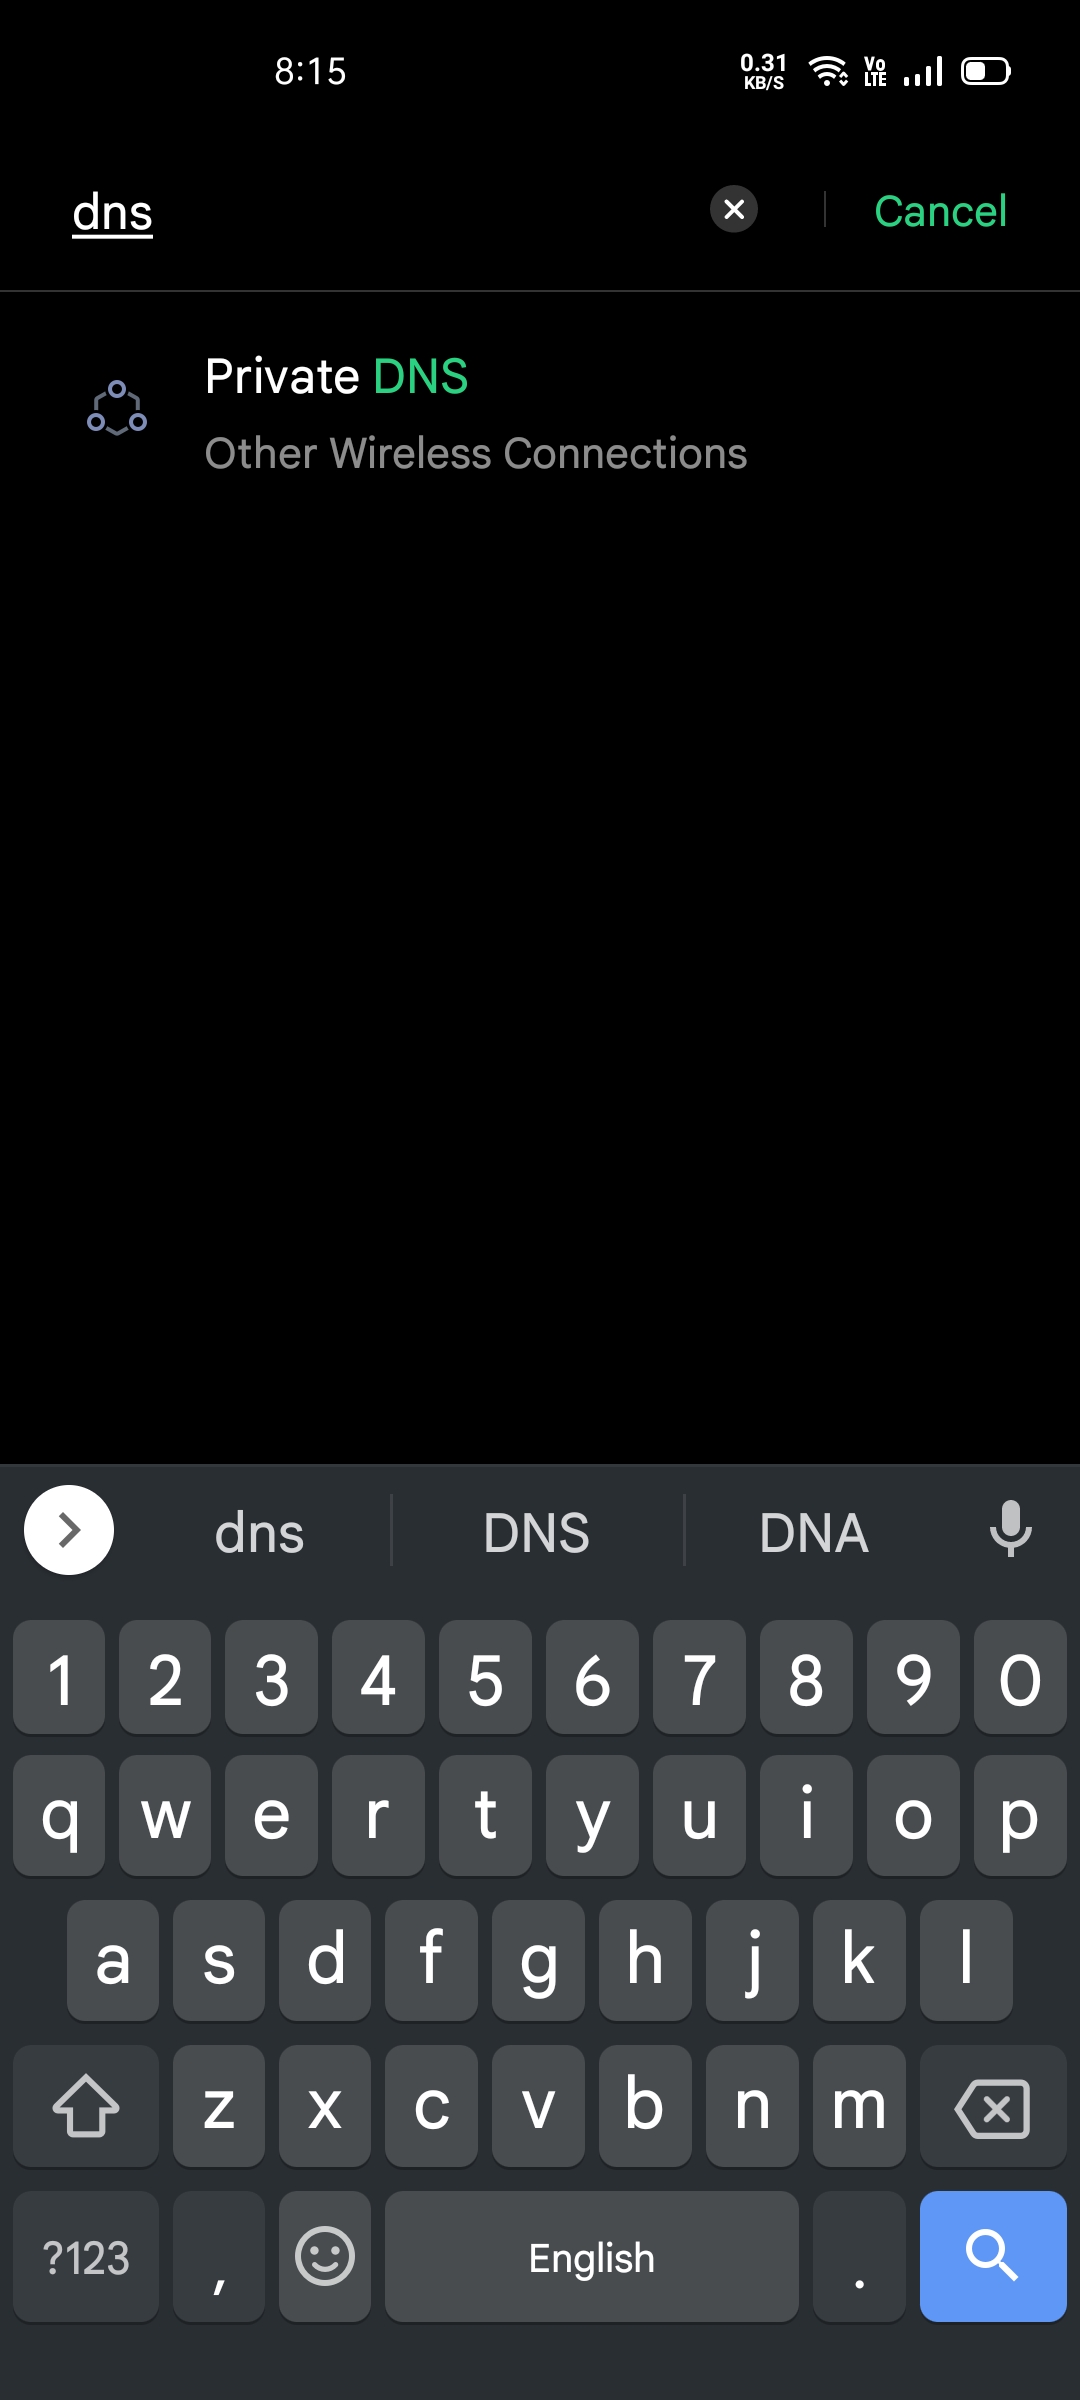 android 8.0.0 dns adguard